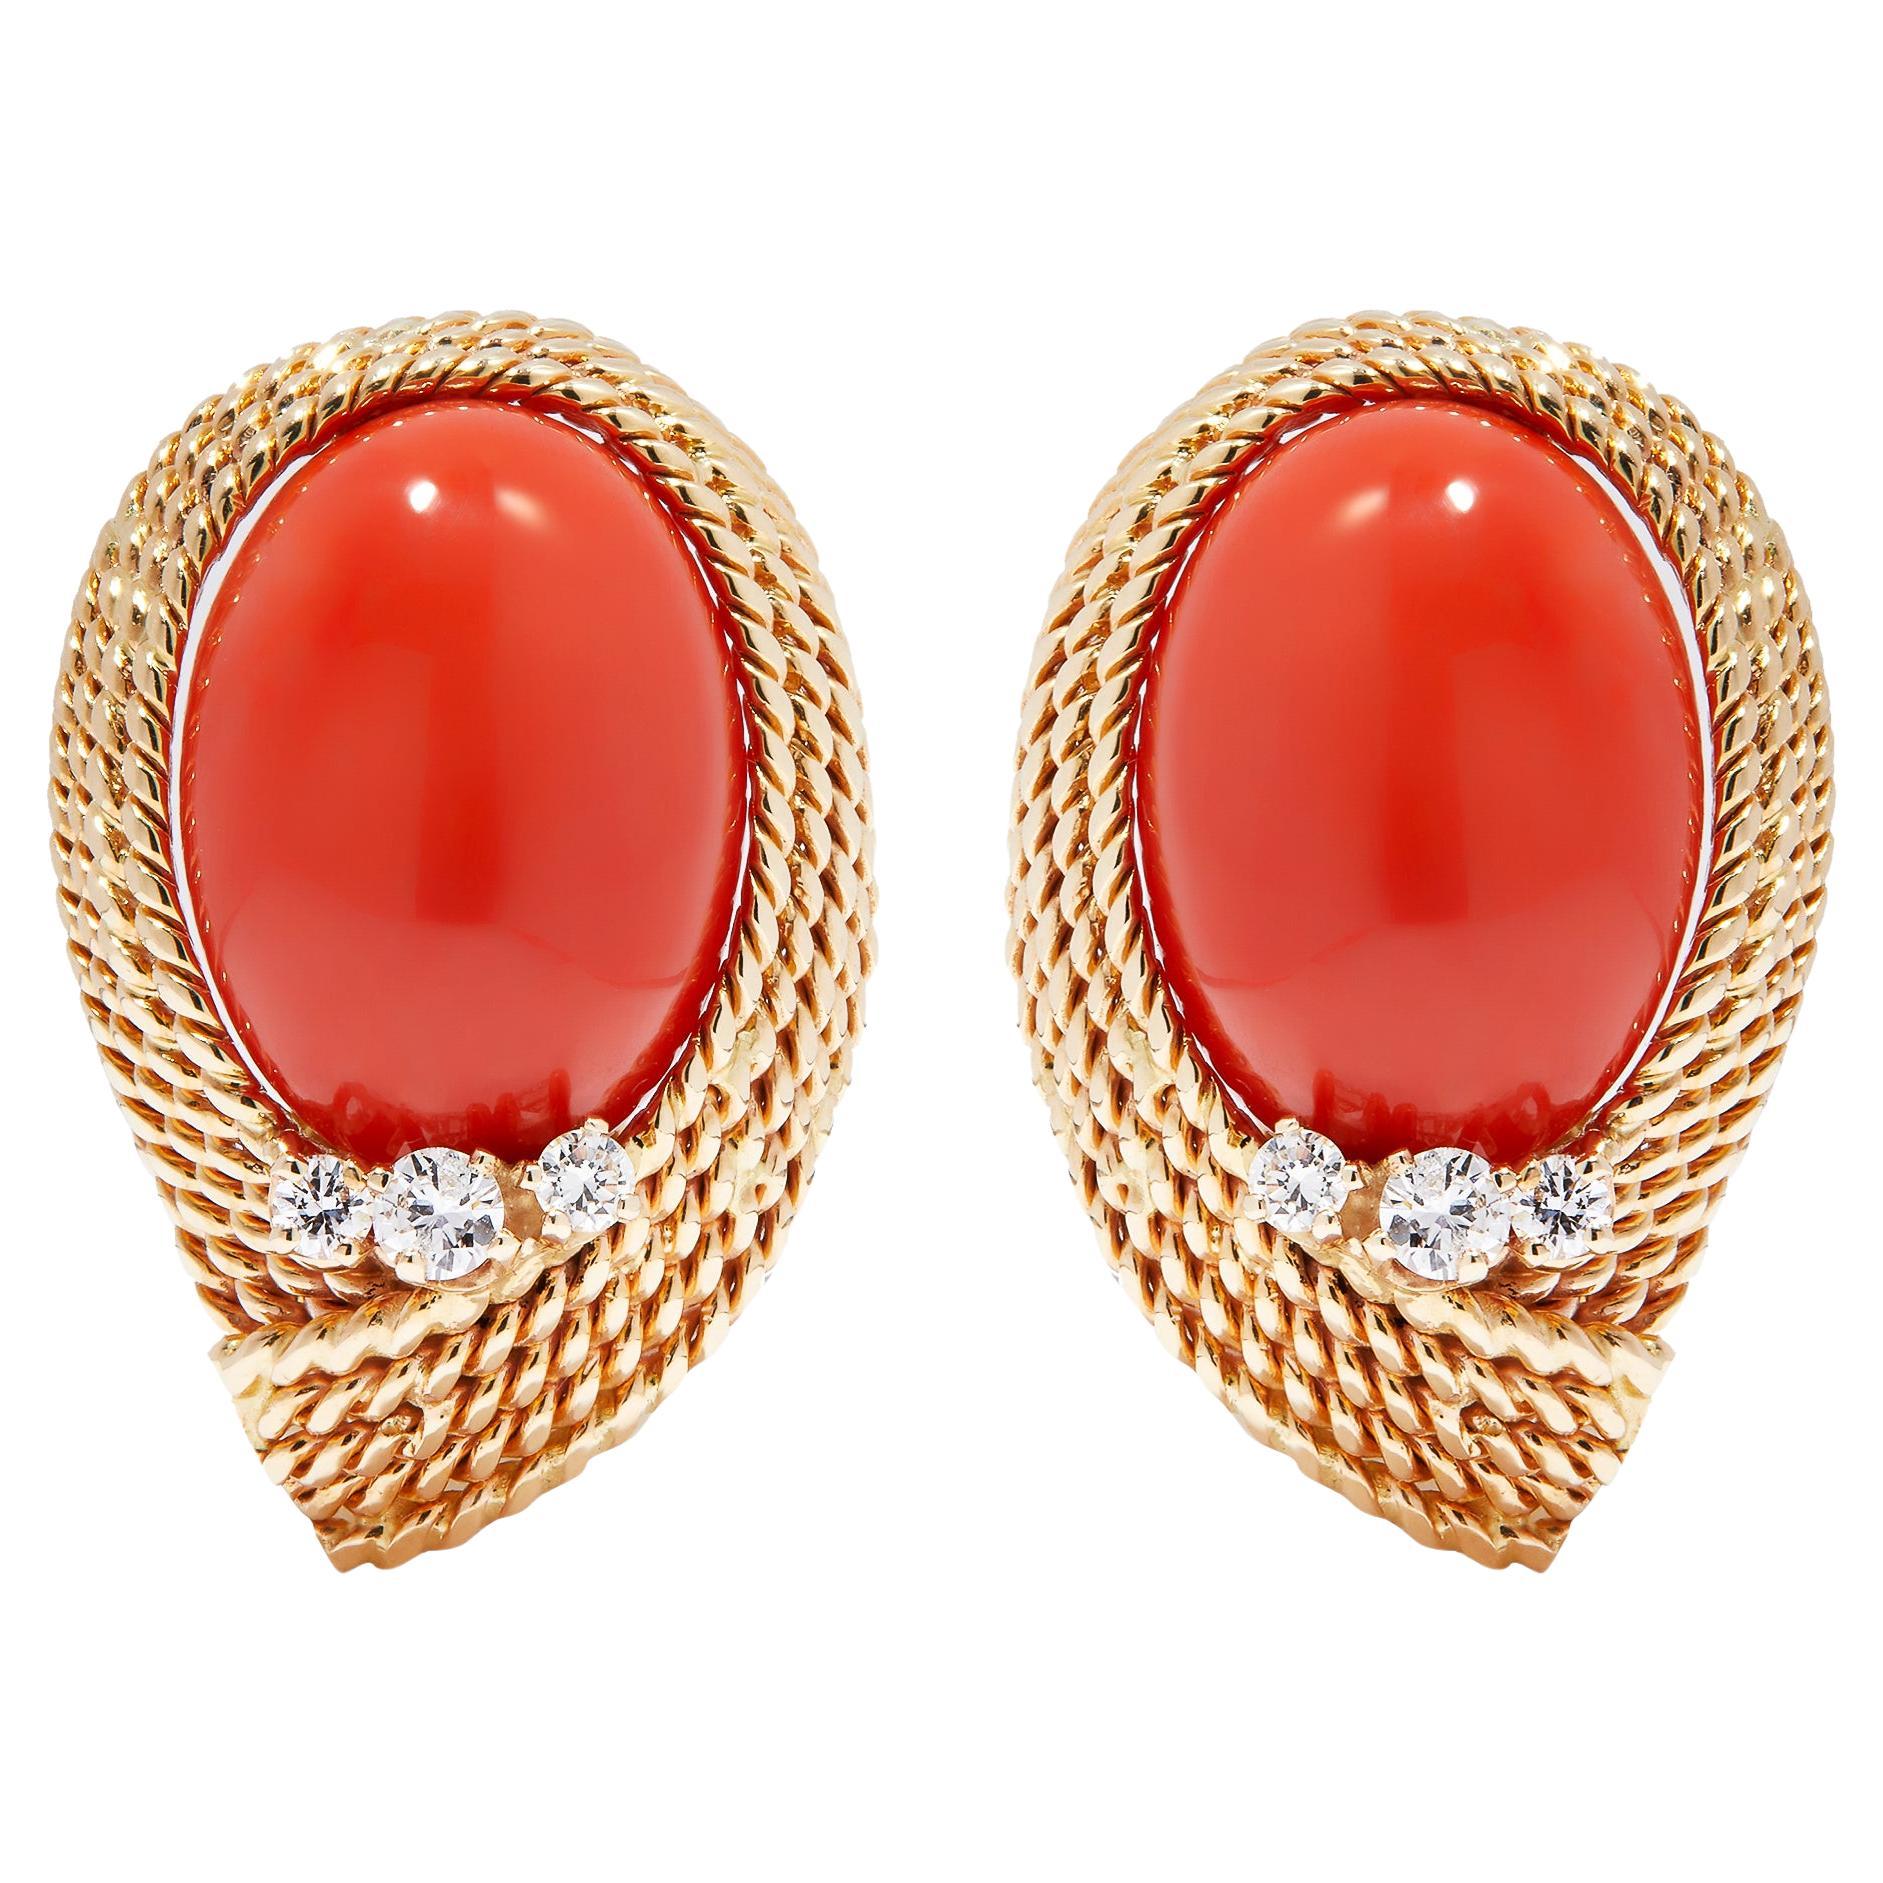 Designer Earrings with Gold Rope Twist and Coral Cabochons For Sale